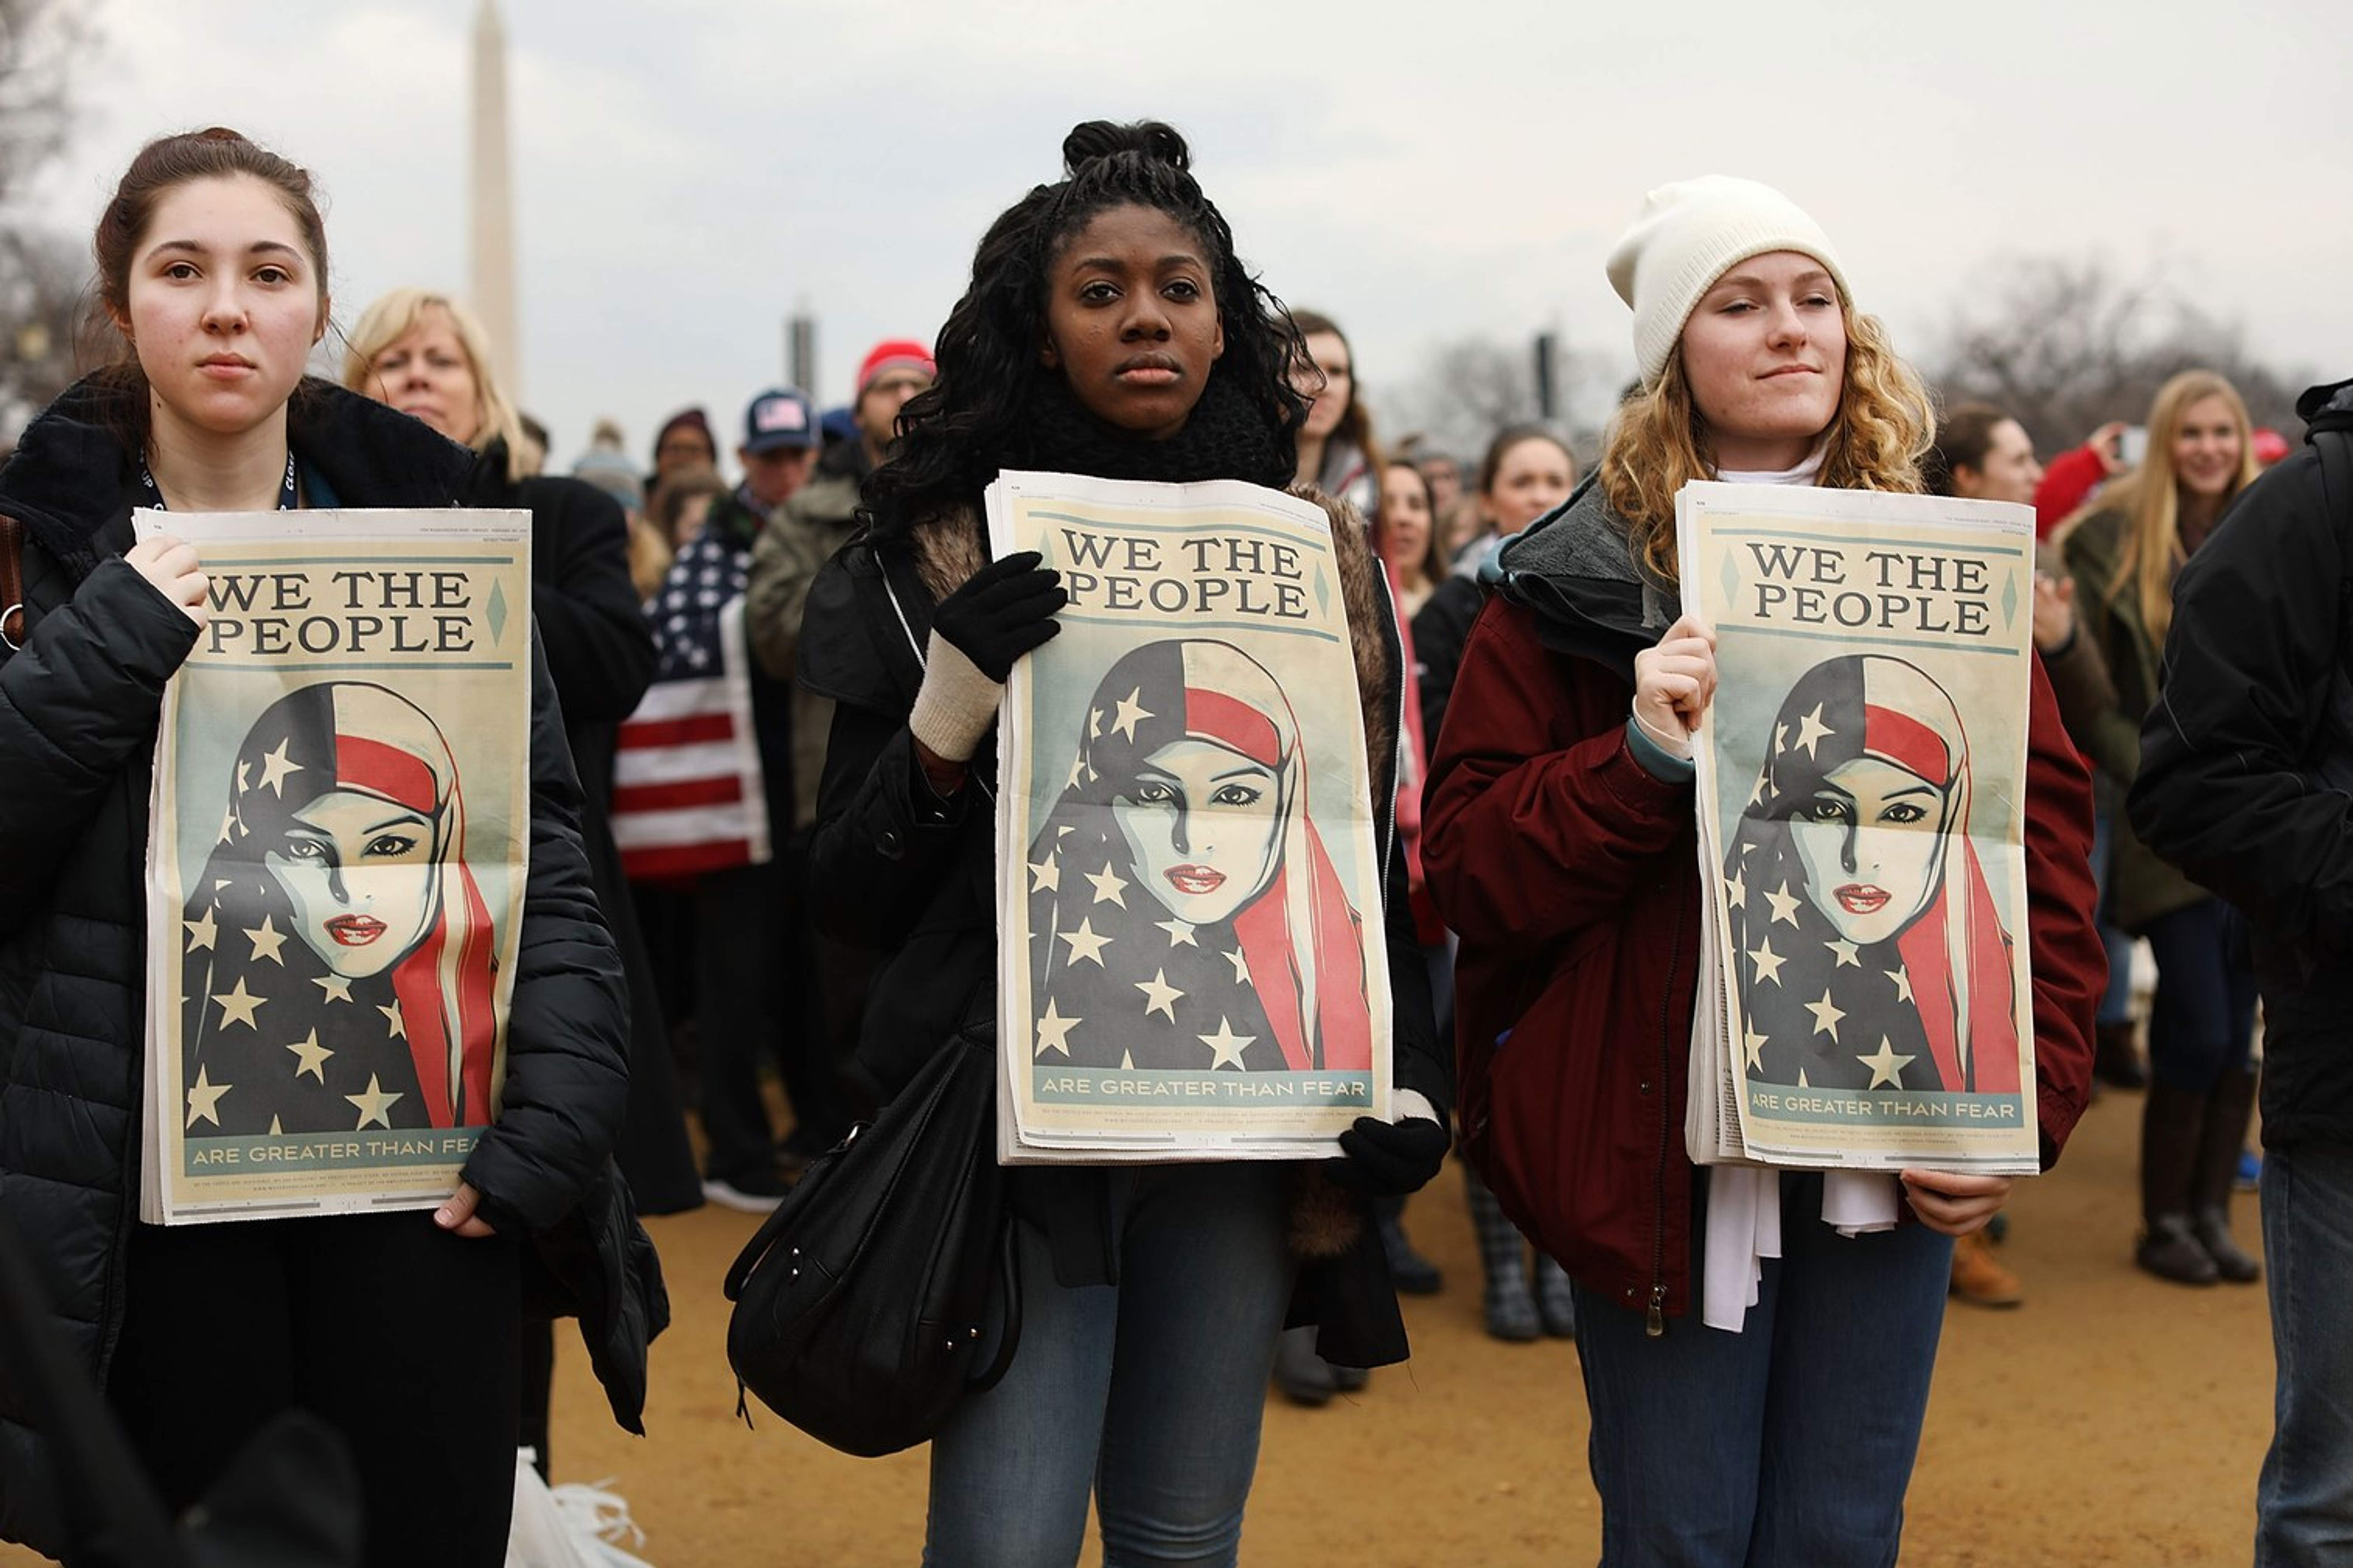 Three women holding up "we the people" posters